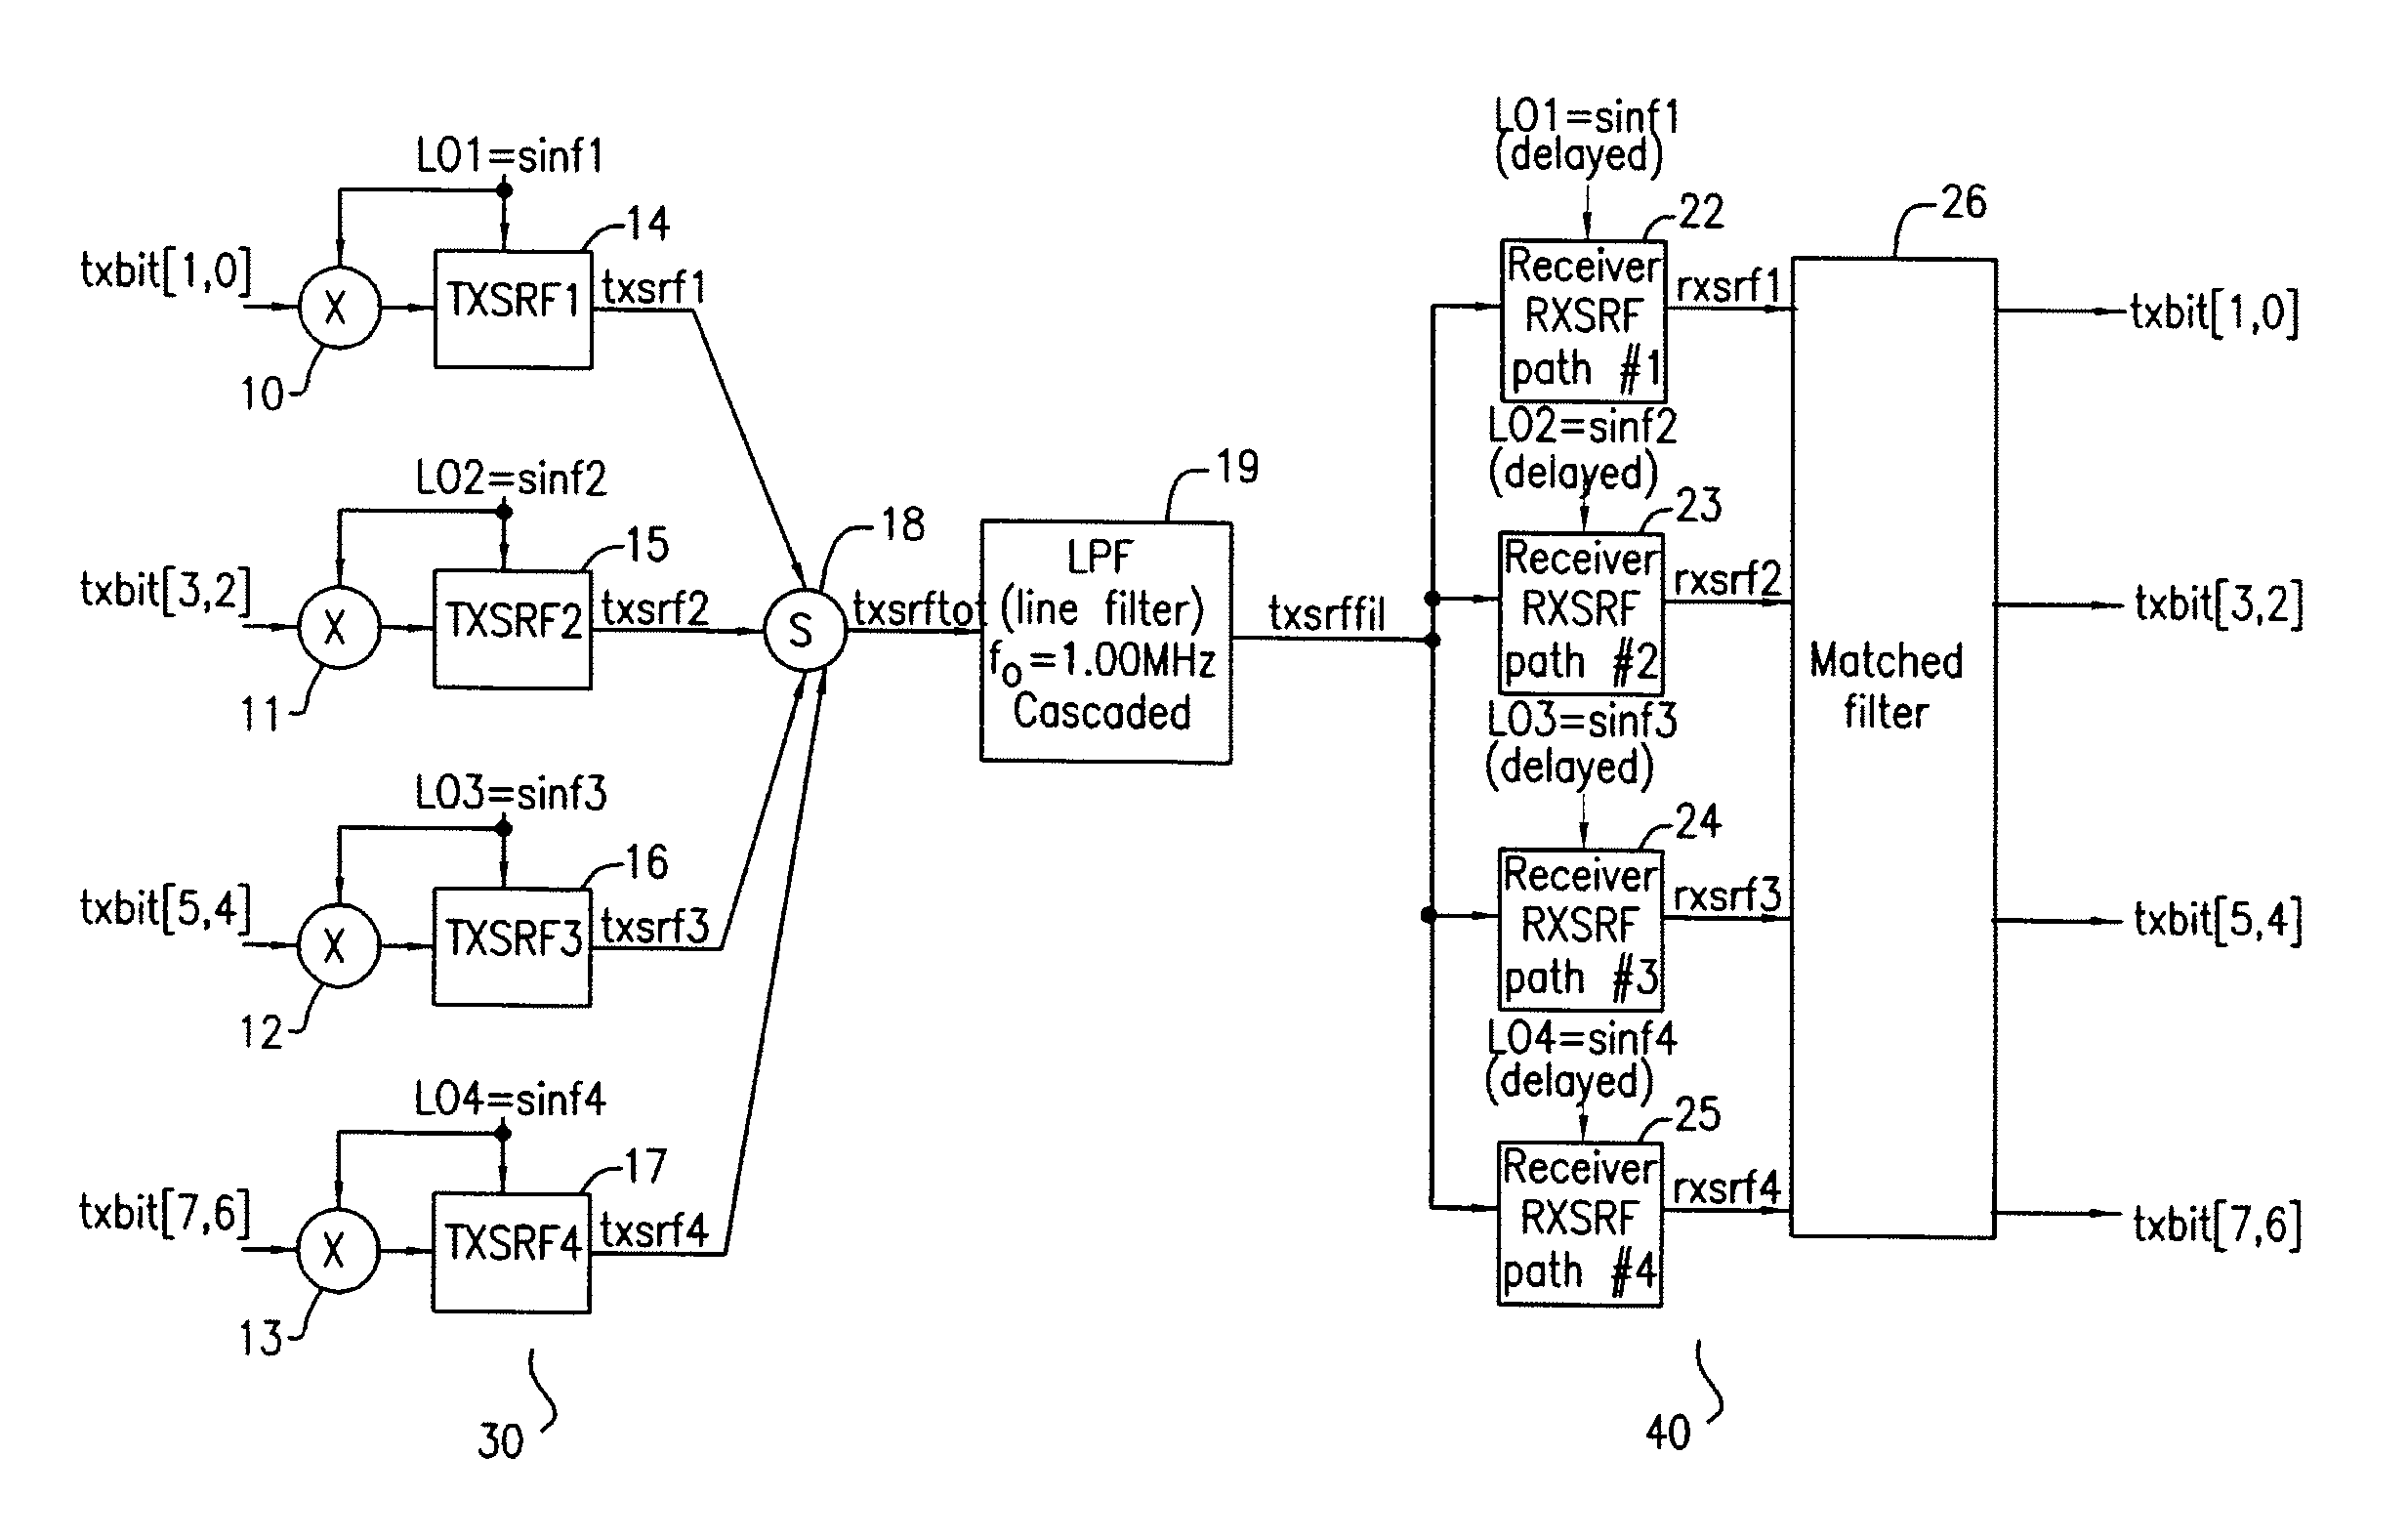 Method and apparatus for increasing the channel capacity of a bandwidth limited communications path